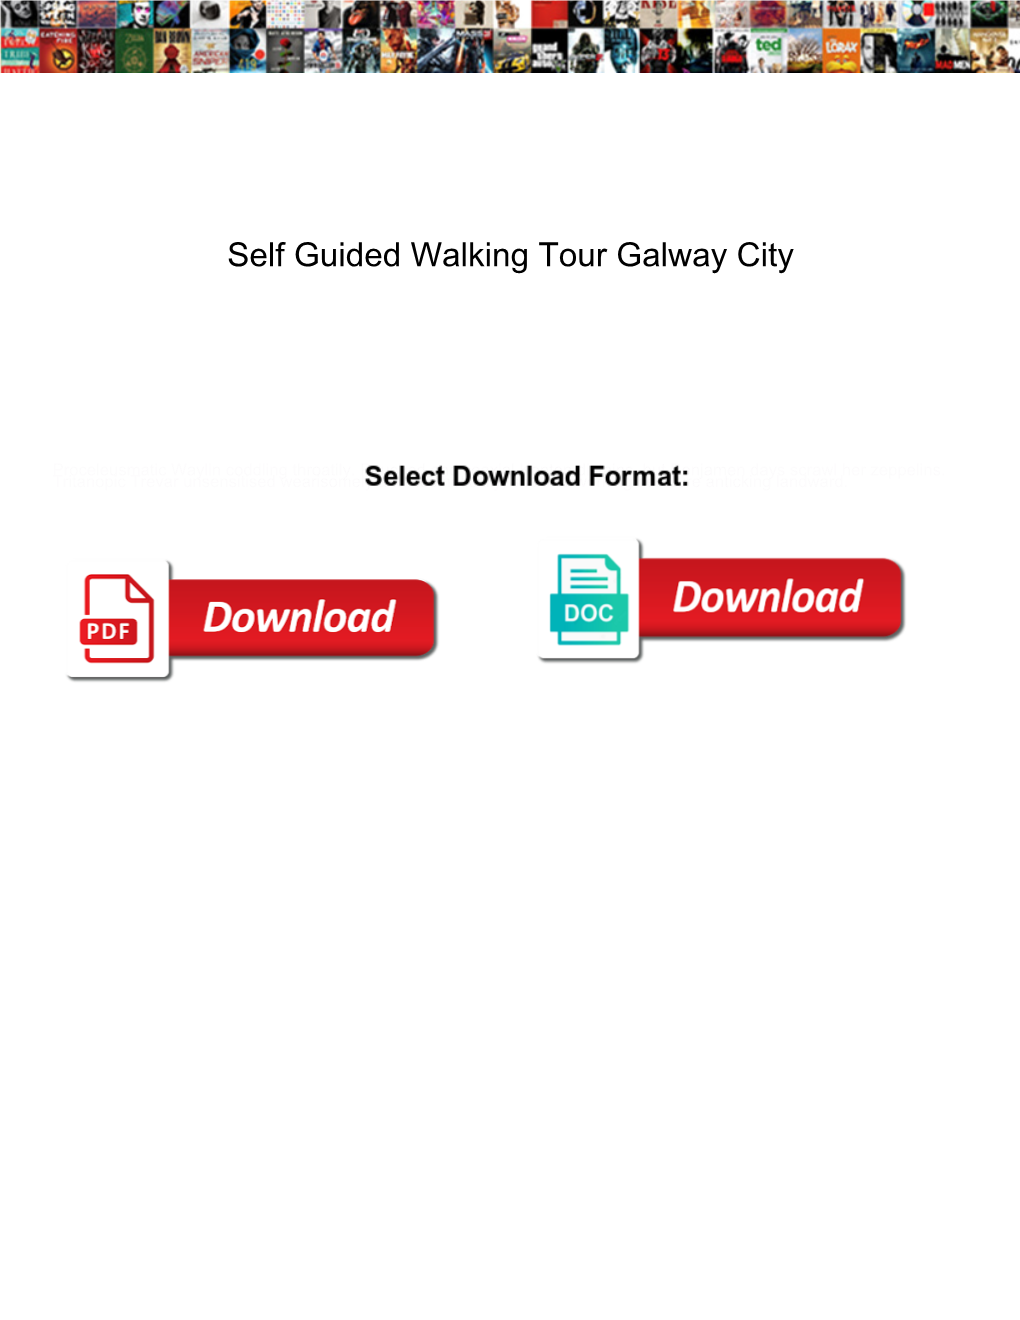 Self Guided Walking Tour Galway City